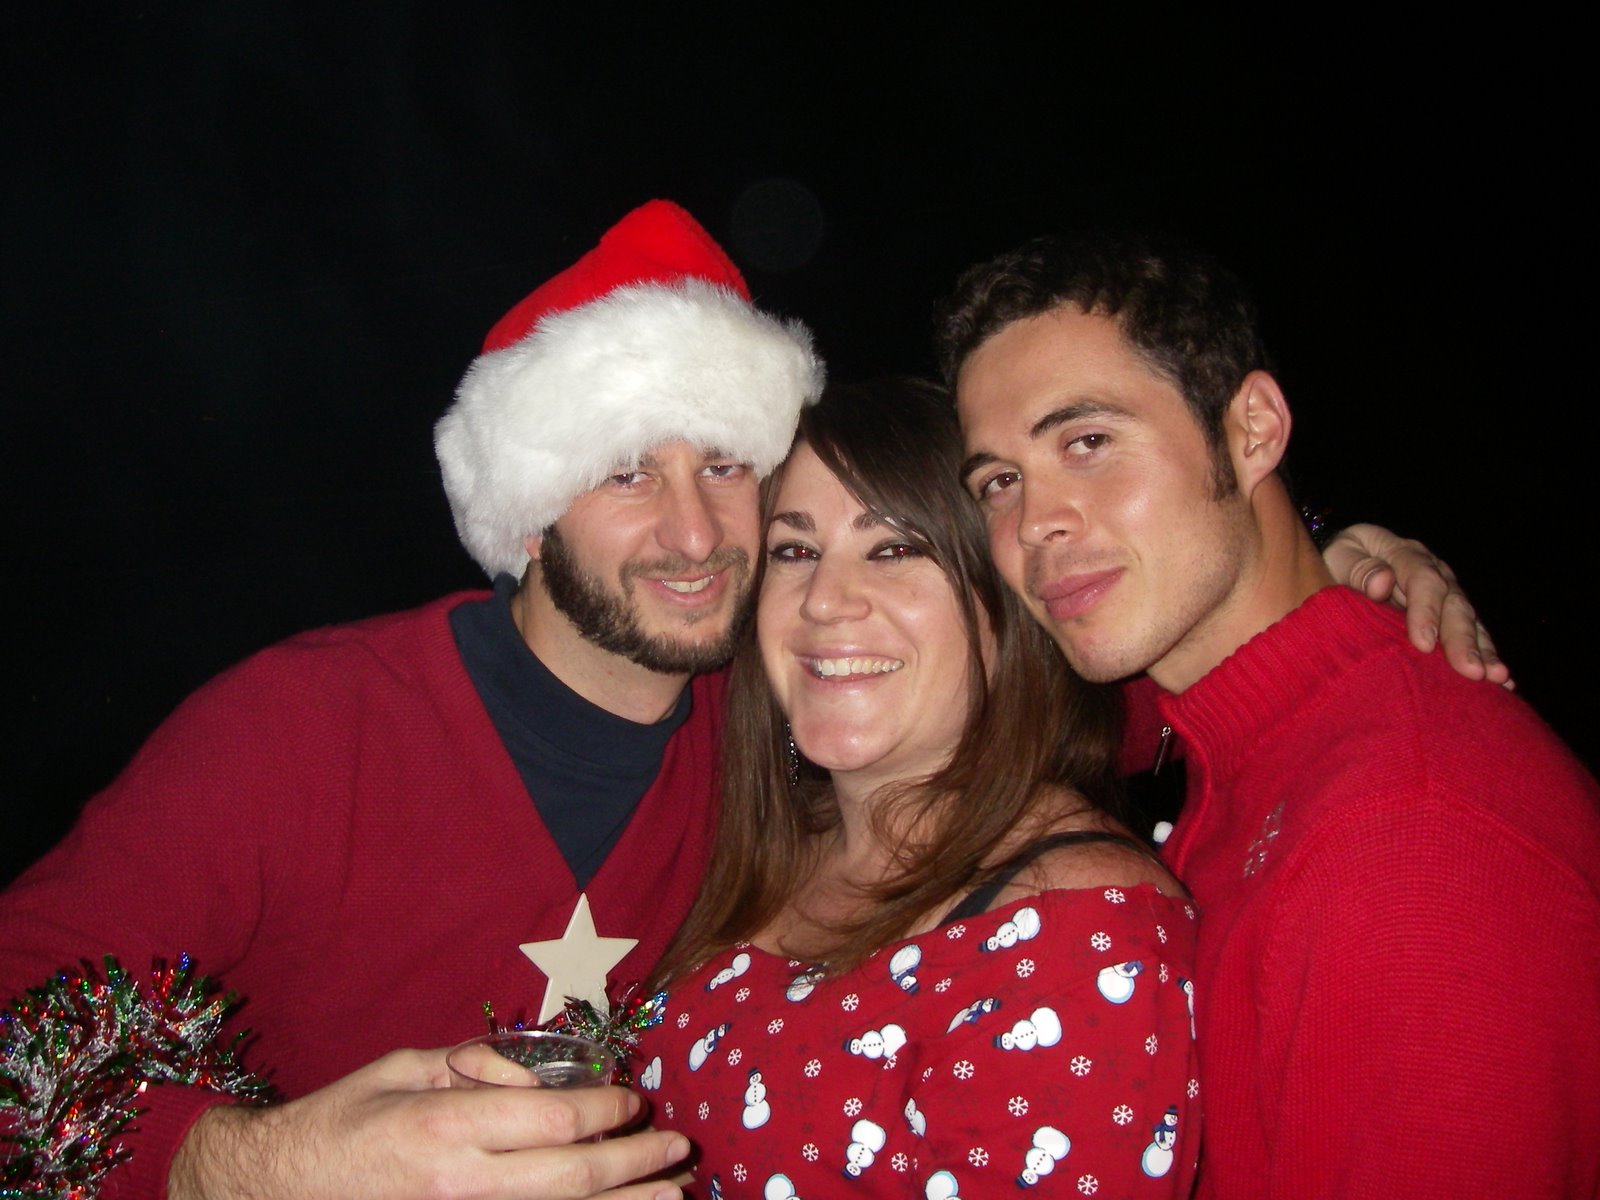 Bad sweater party 029.jpg